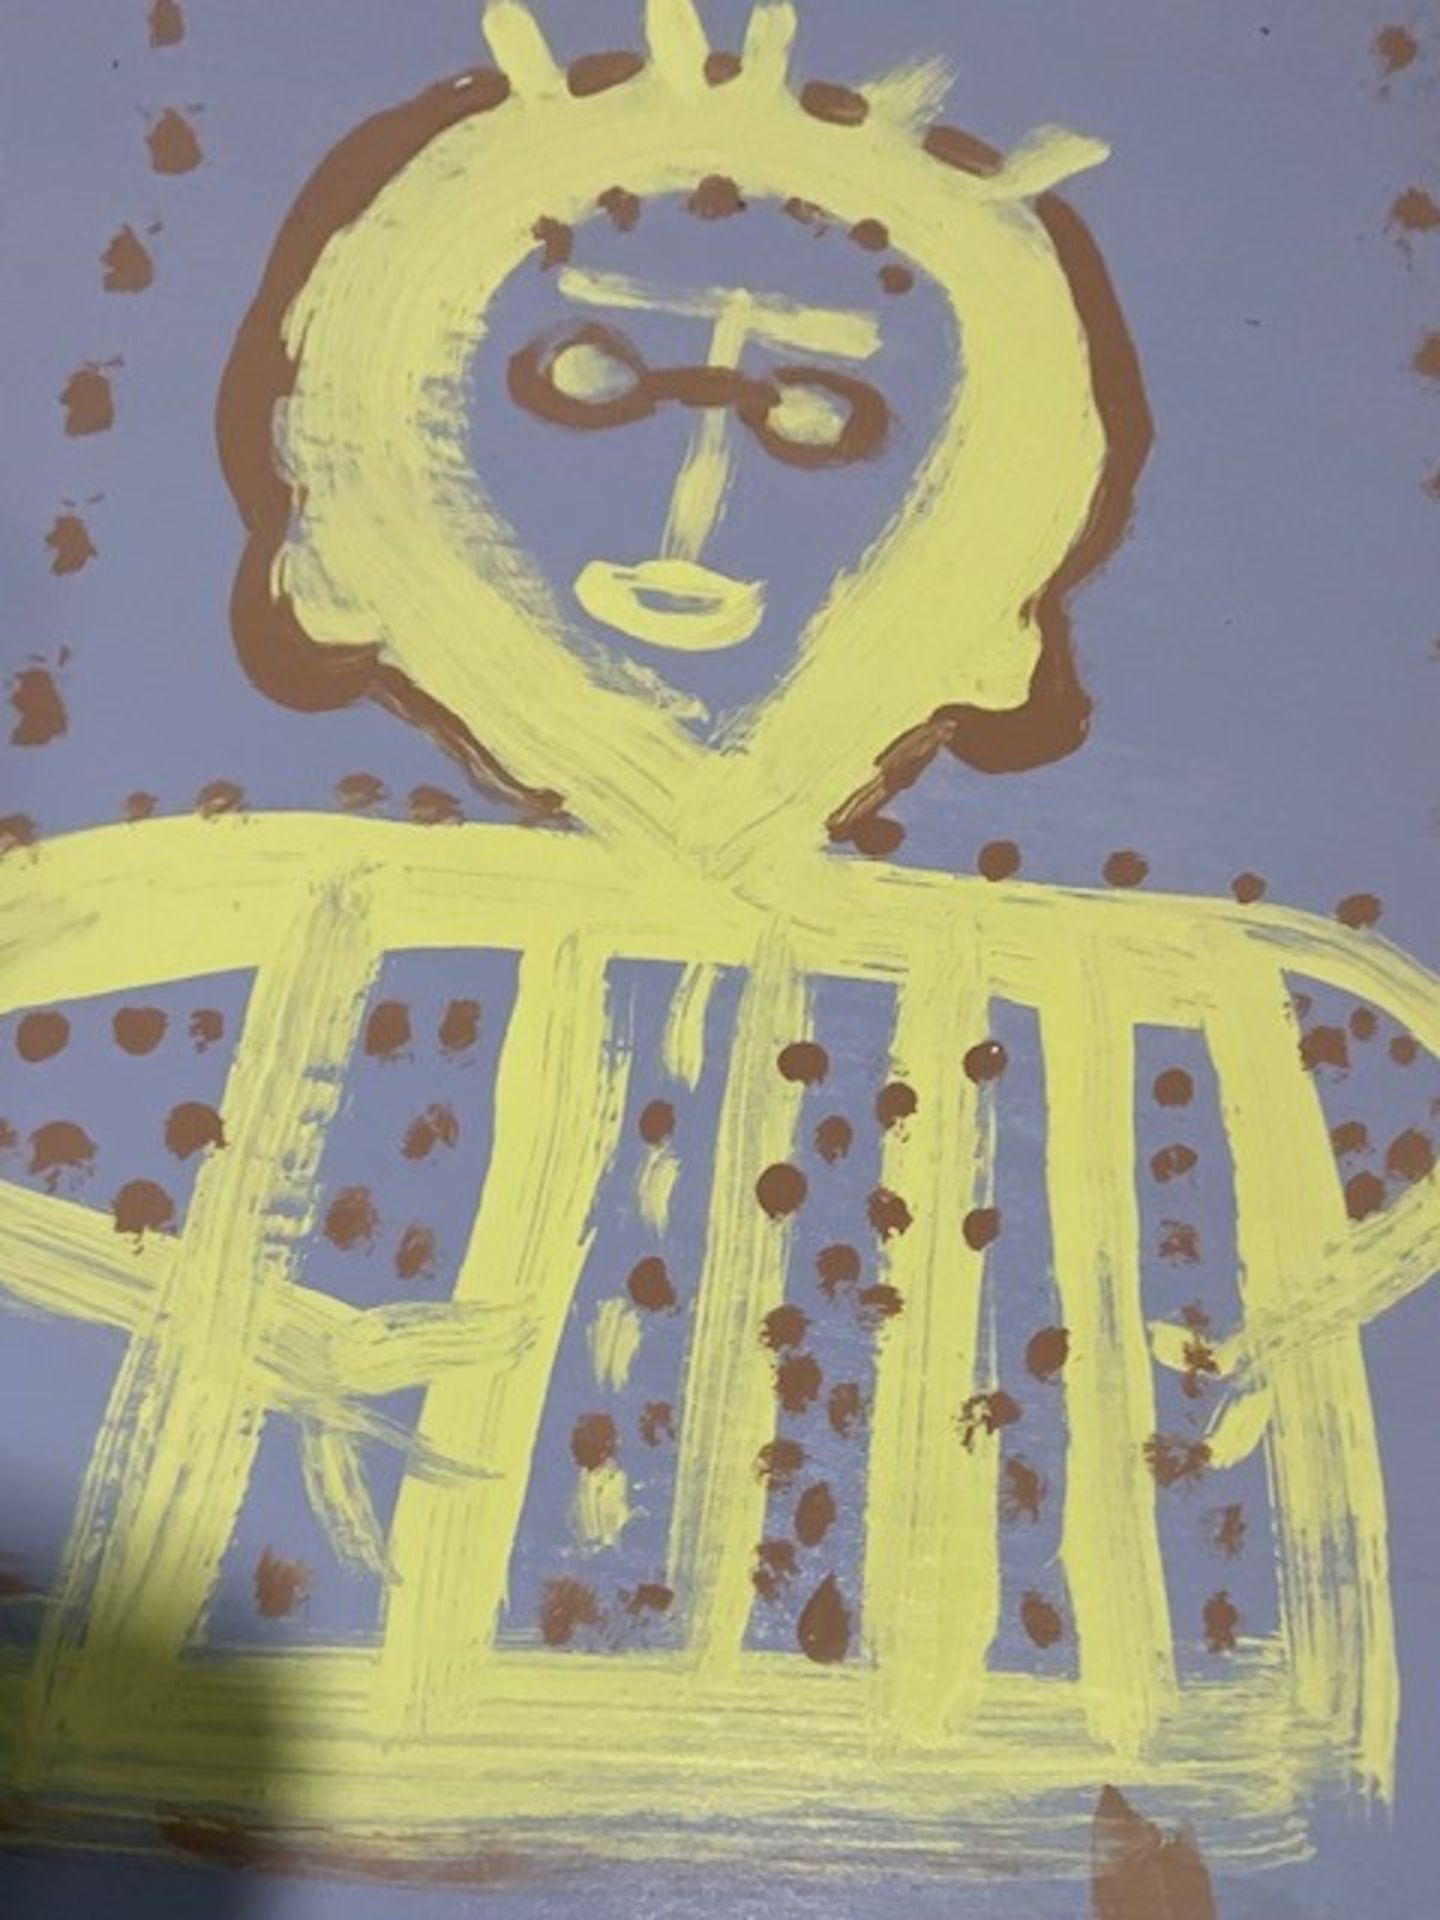 Mary T. Smith "Untitled Figure" Painting - Image 6 of 6